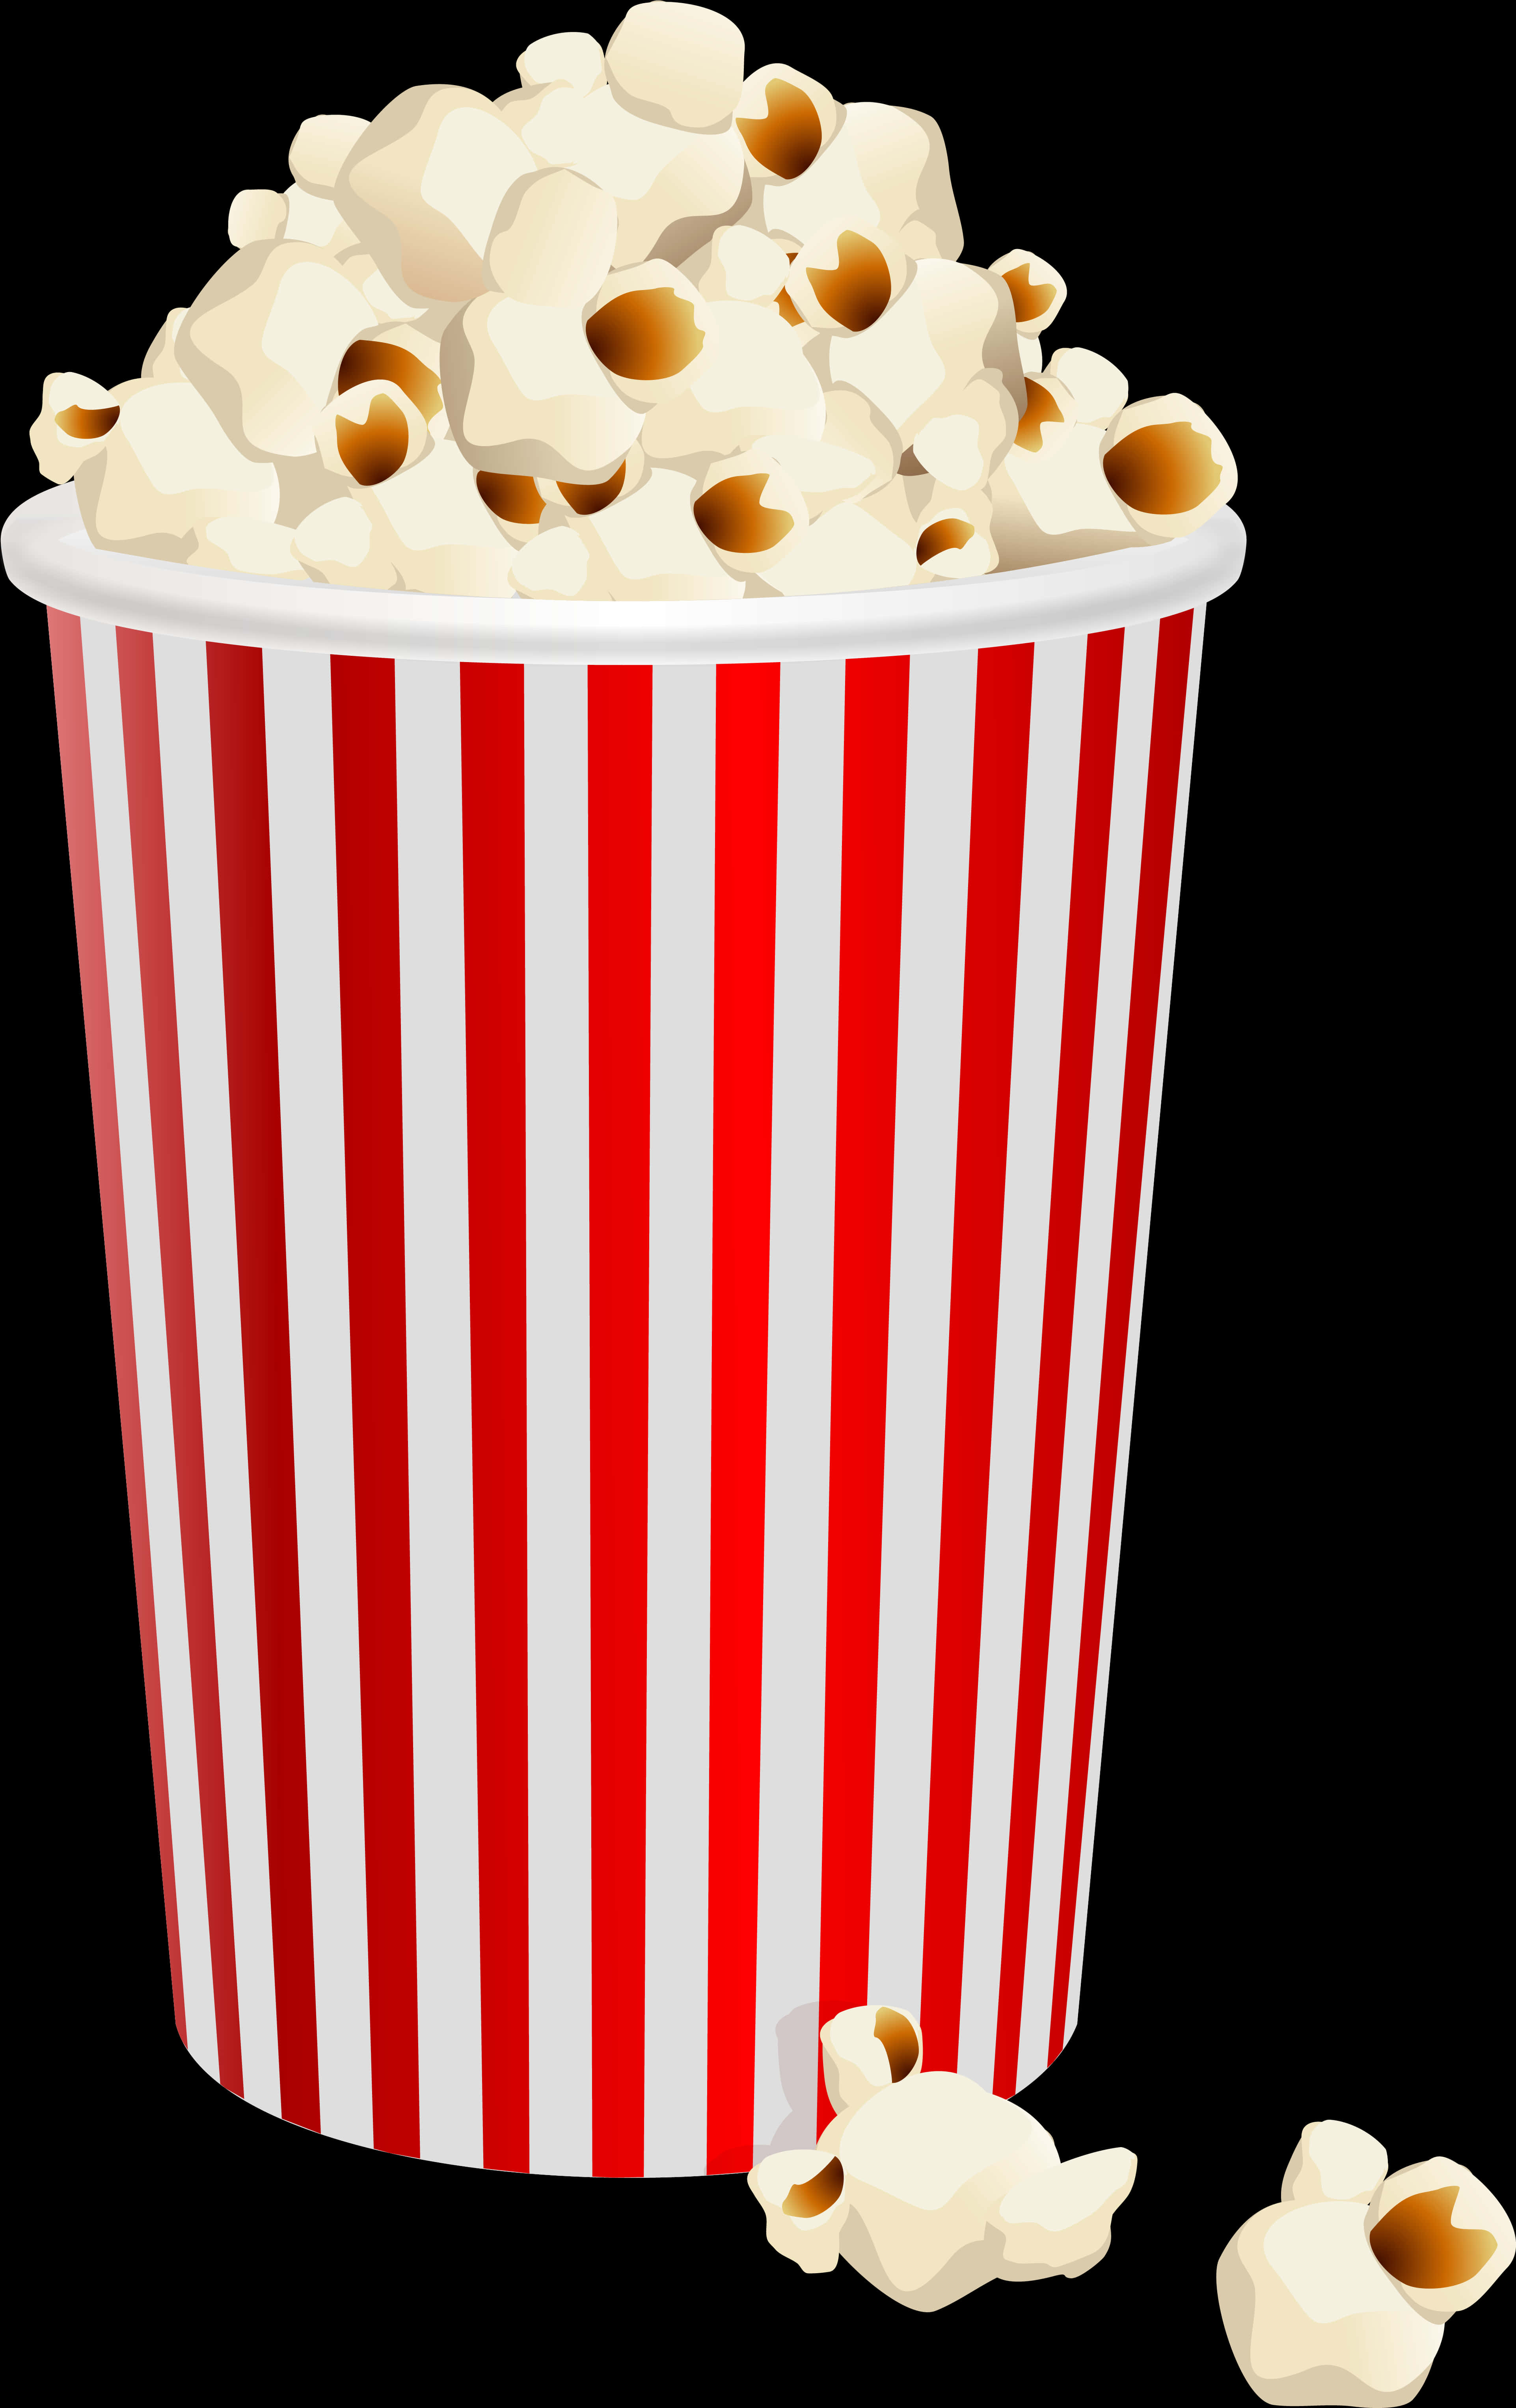 A Red And White Striped Bucket Of Popcorn